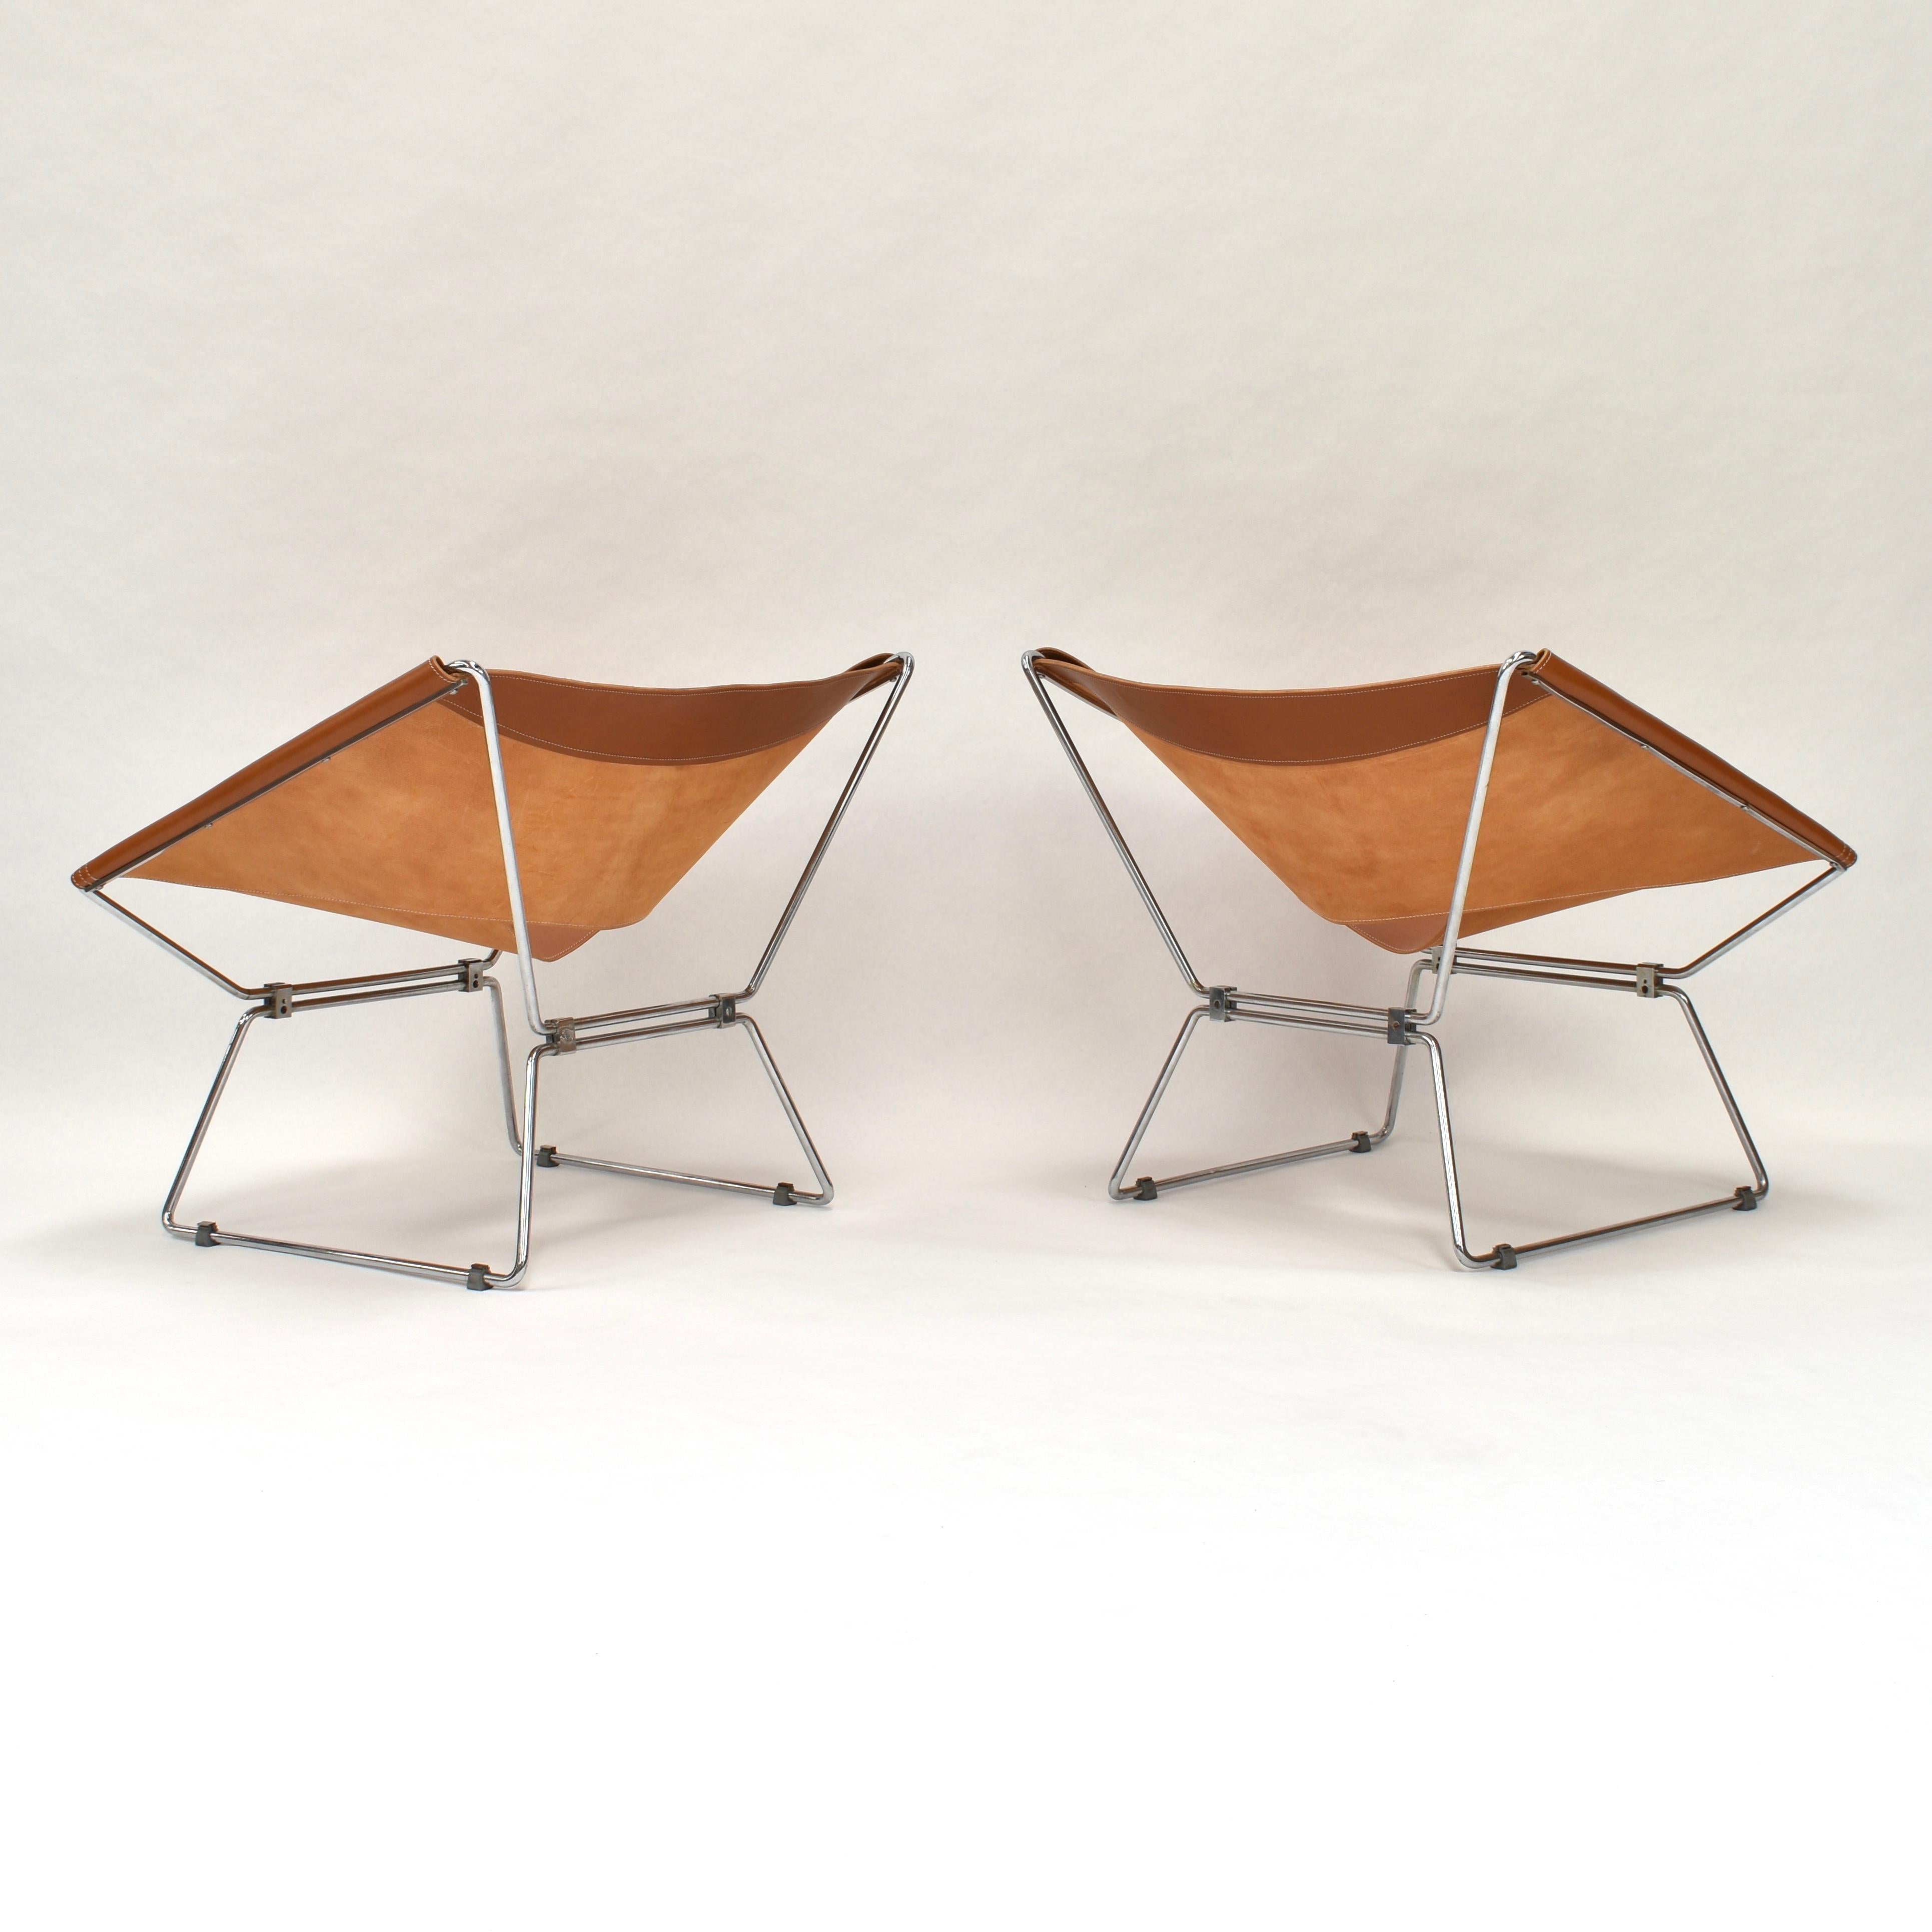 1x Pierre Paulin AP-14 'Anneau' Butterfly Chair with New Saddle Leather, 1950s 1